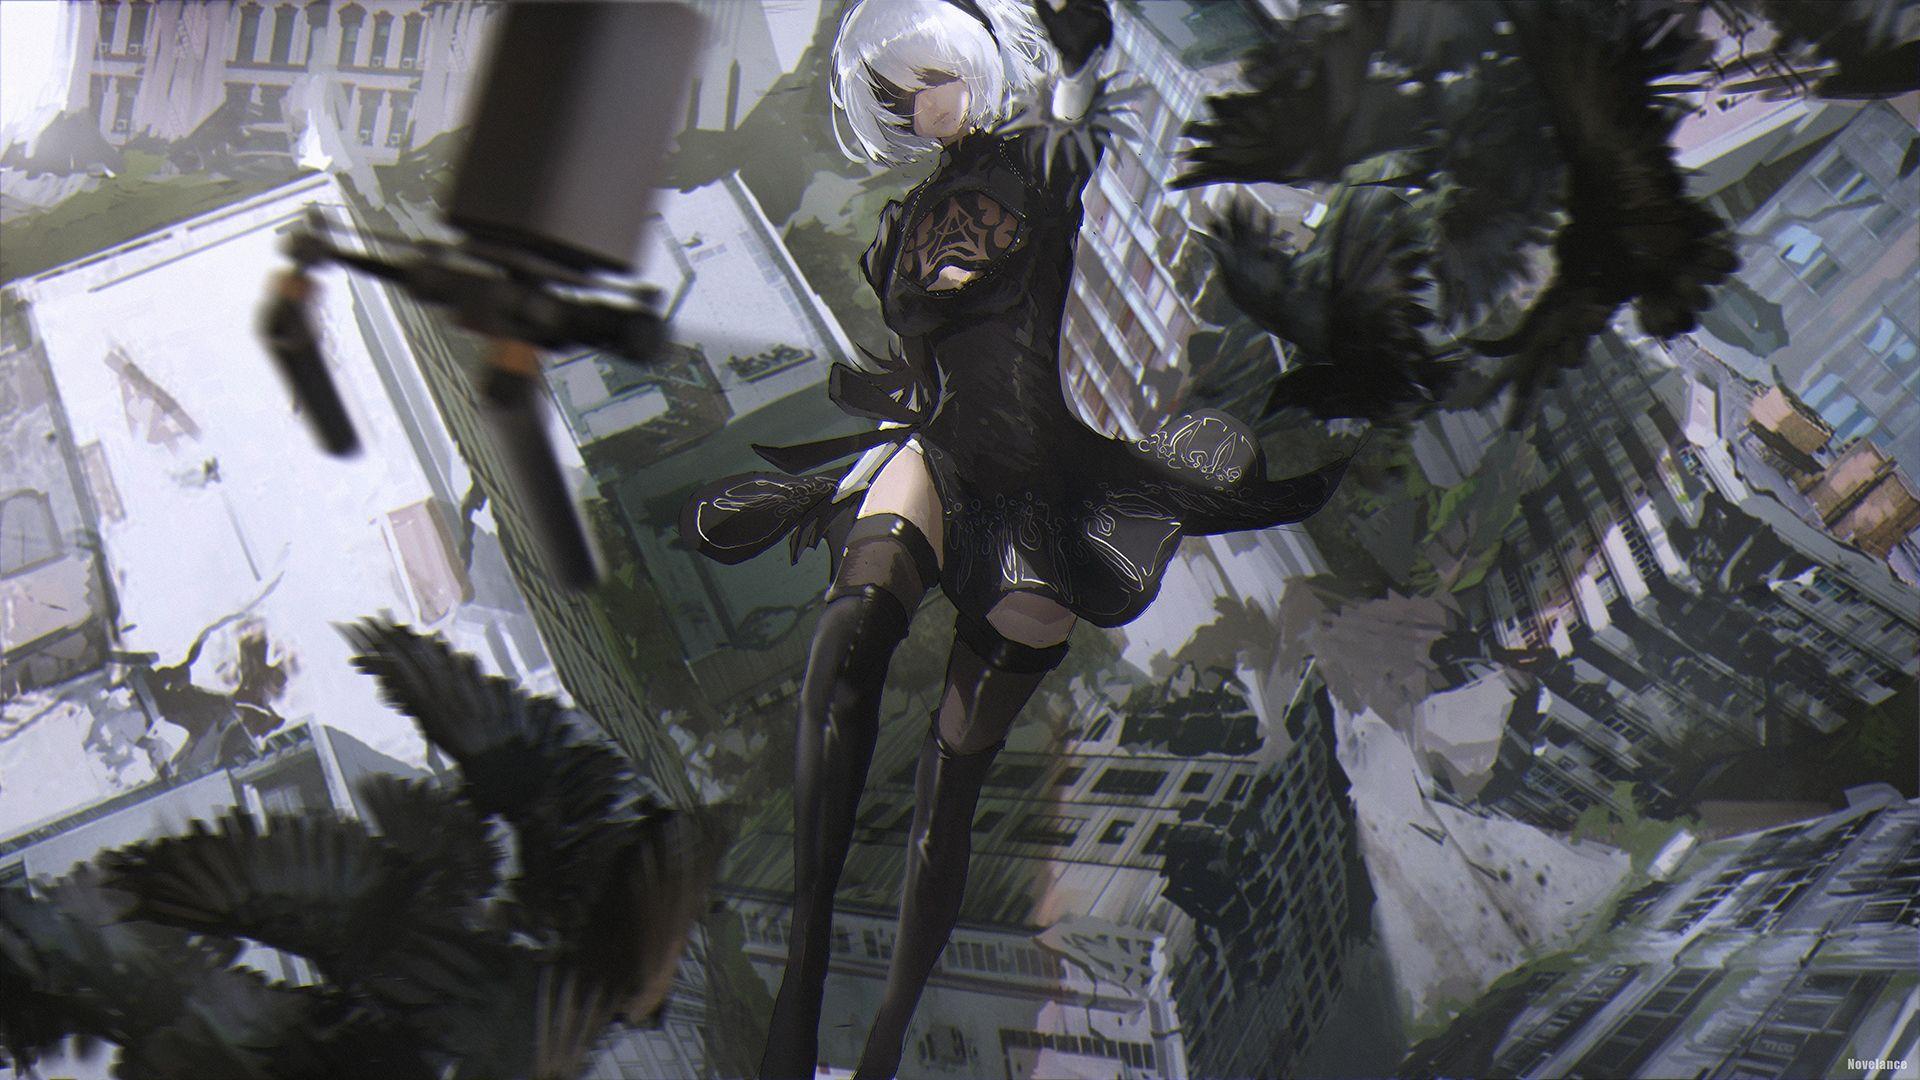 Nier Automata Wallpapers Top Free Nier Automata Backgrounds Wallpaperaccess